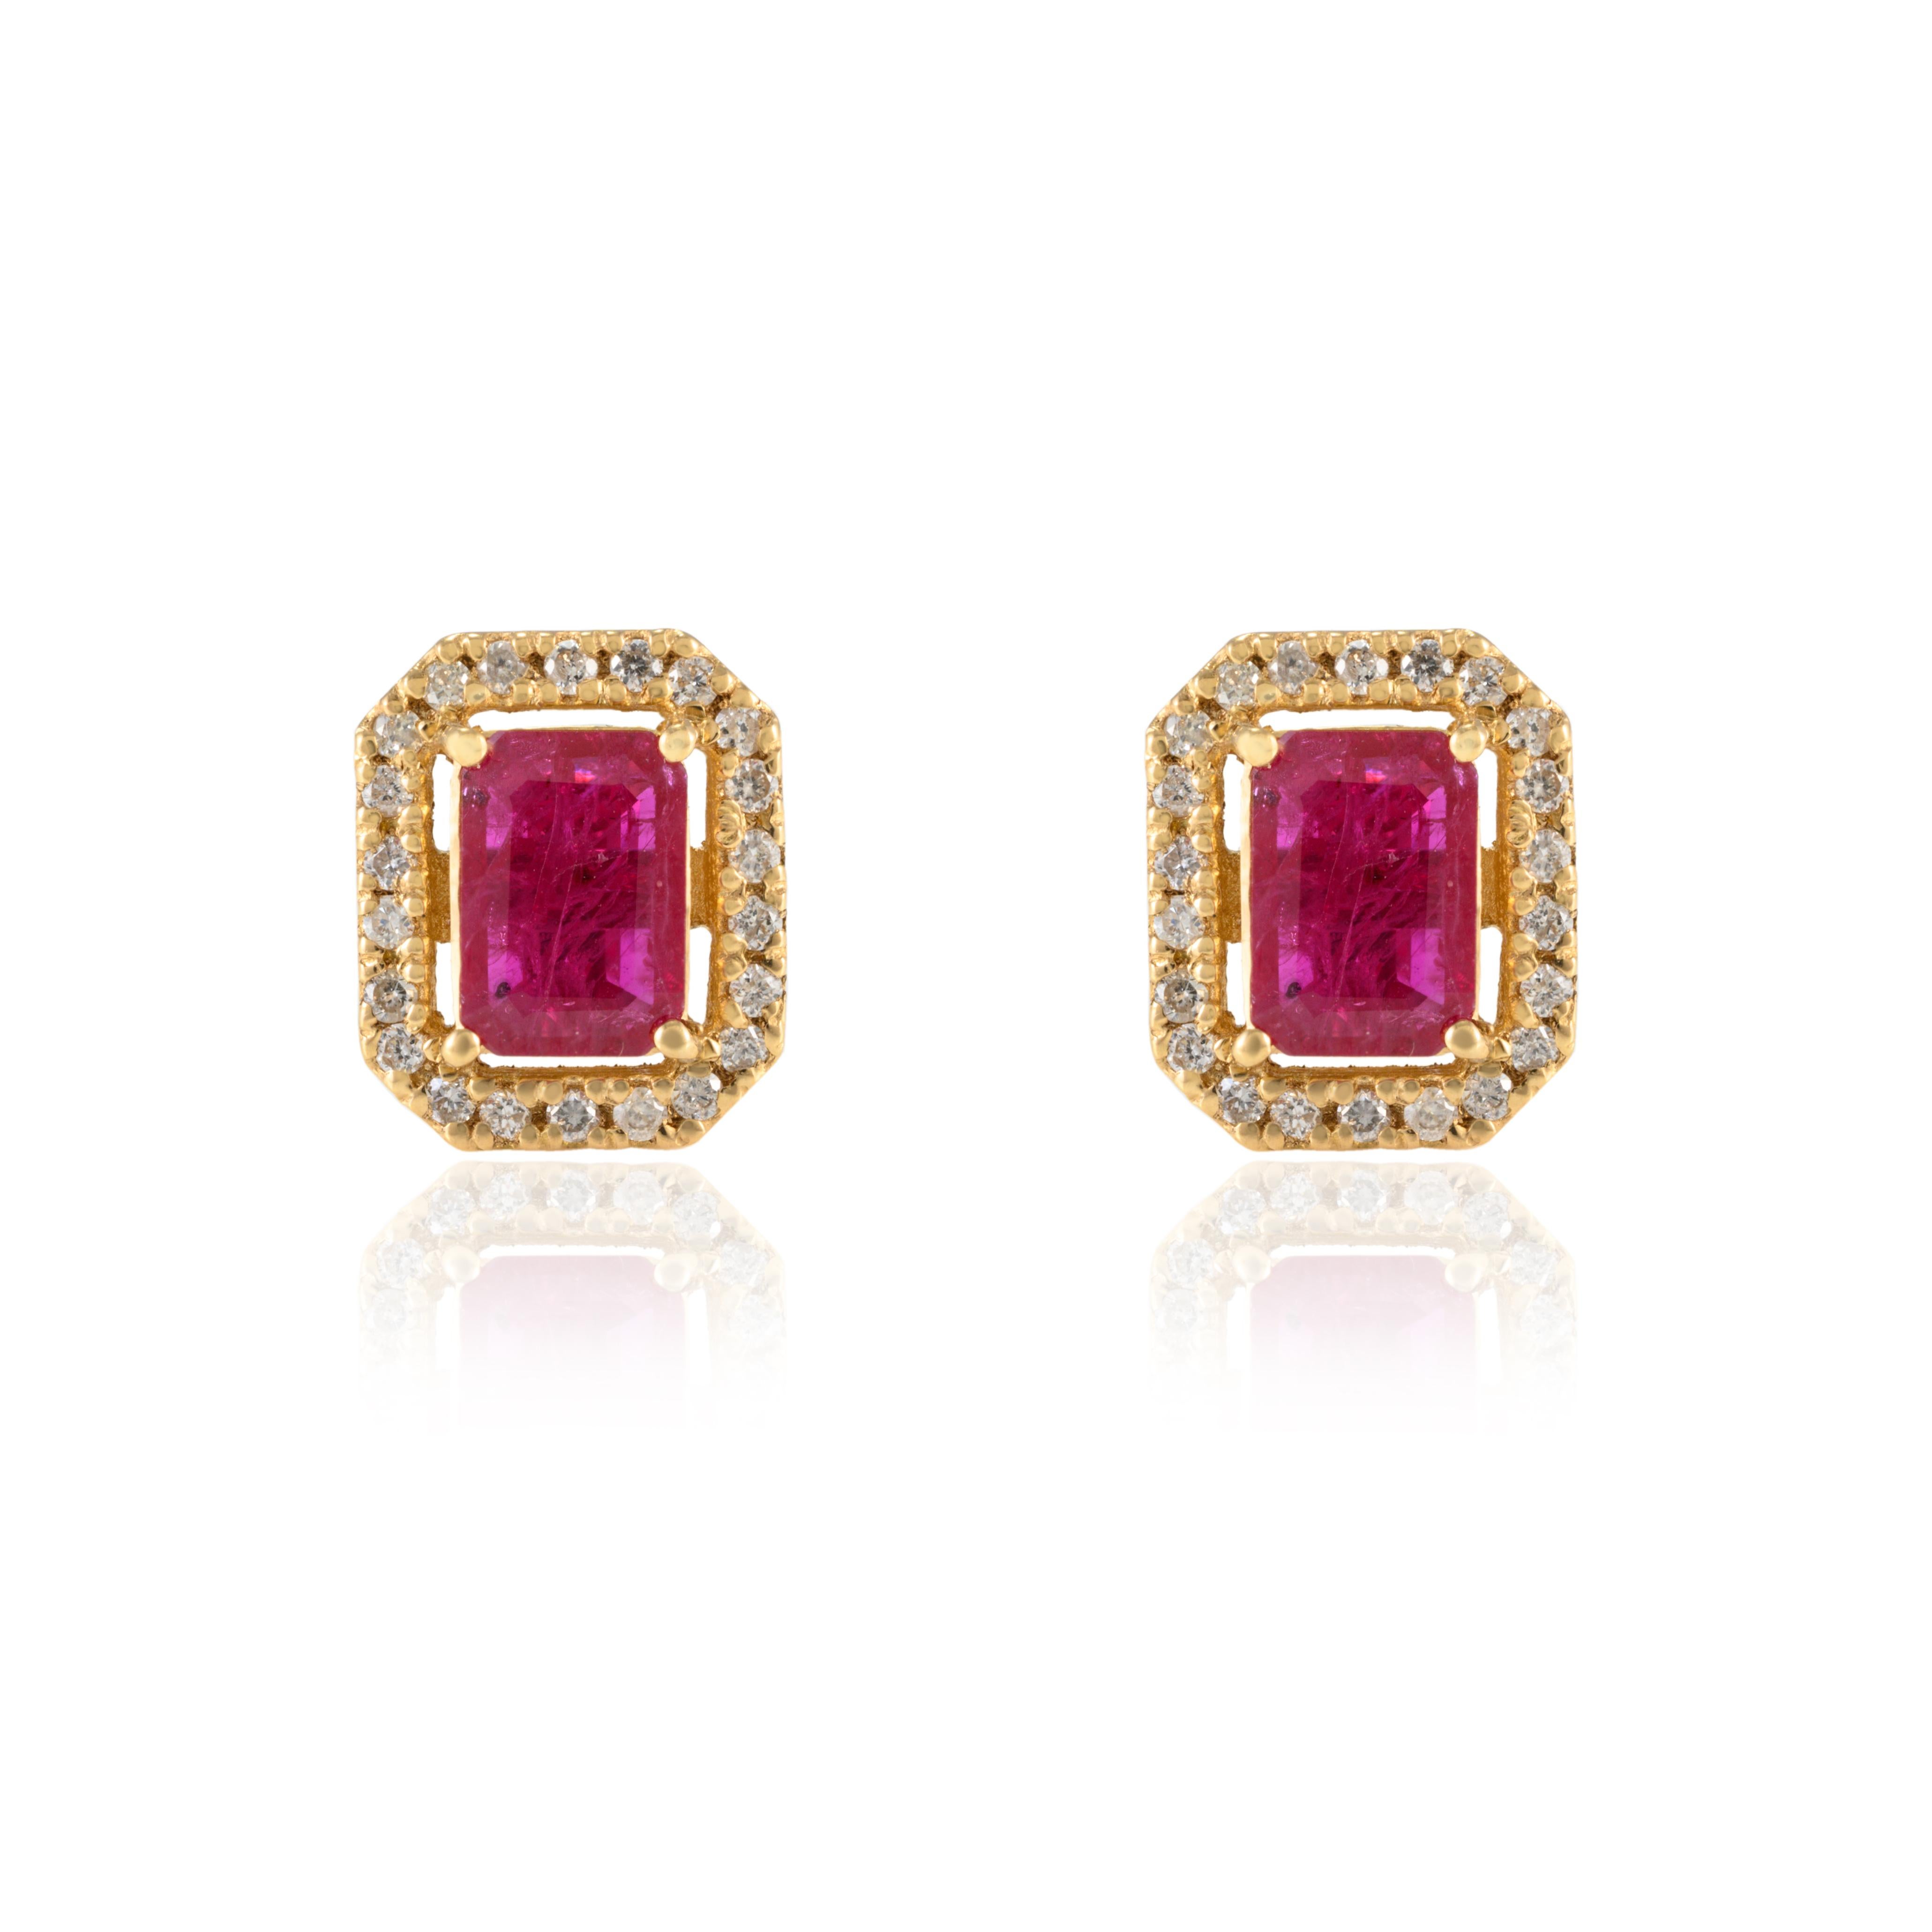 Art Deco Ruby Halo Diamond Stud Earrings in 18k Solid Yellow Gold Gift For Her For Sale